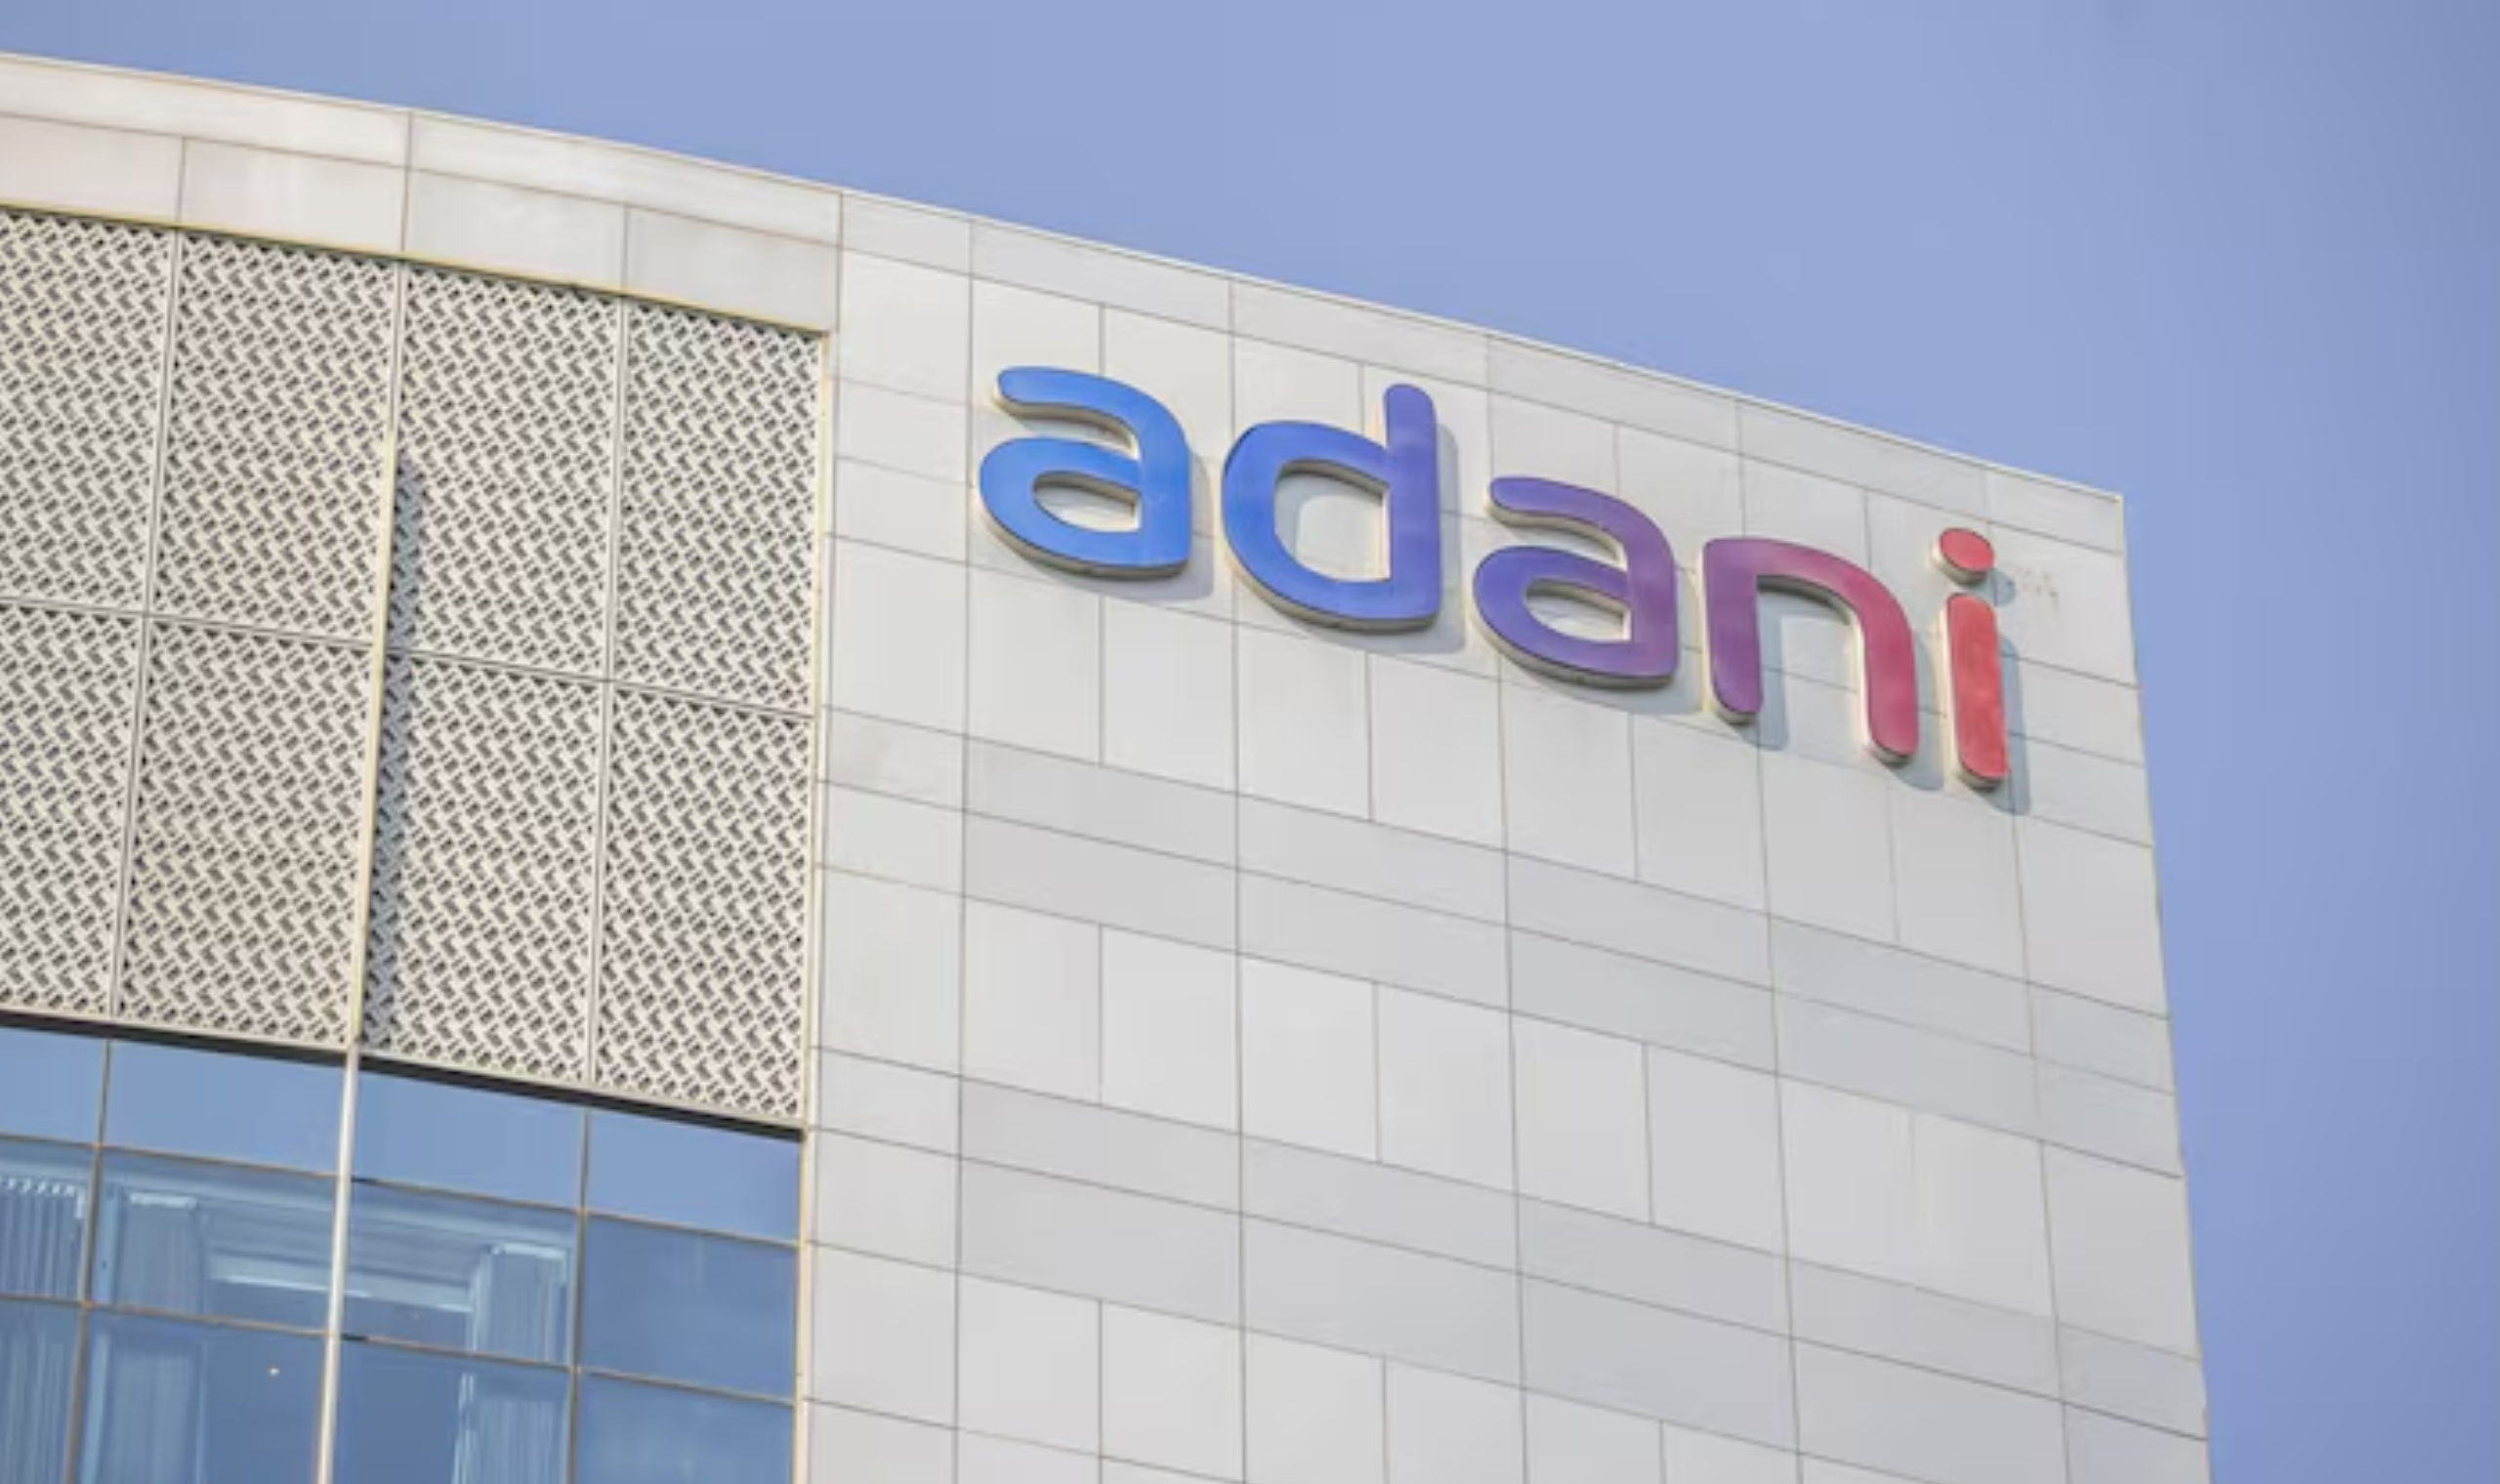 Adani Group Shares Continue to Rally, Gain INR 2.6 Lakh Crore in Two Days